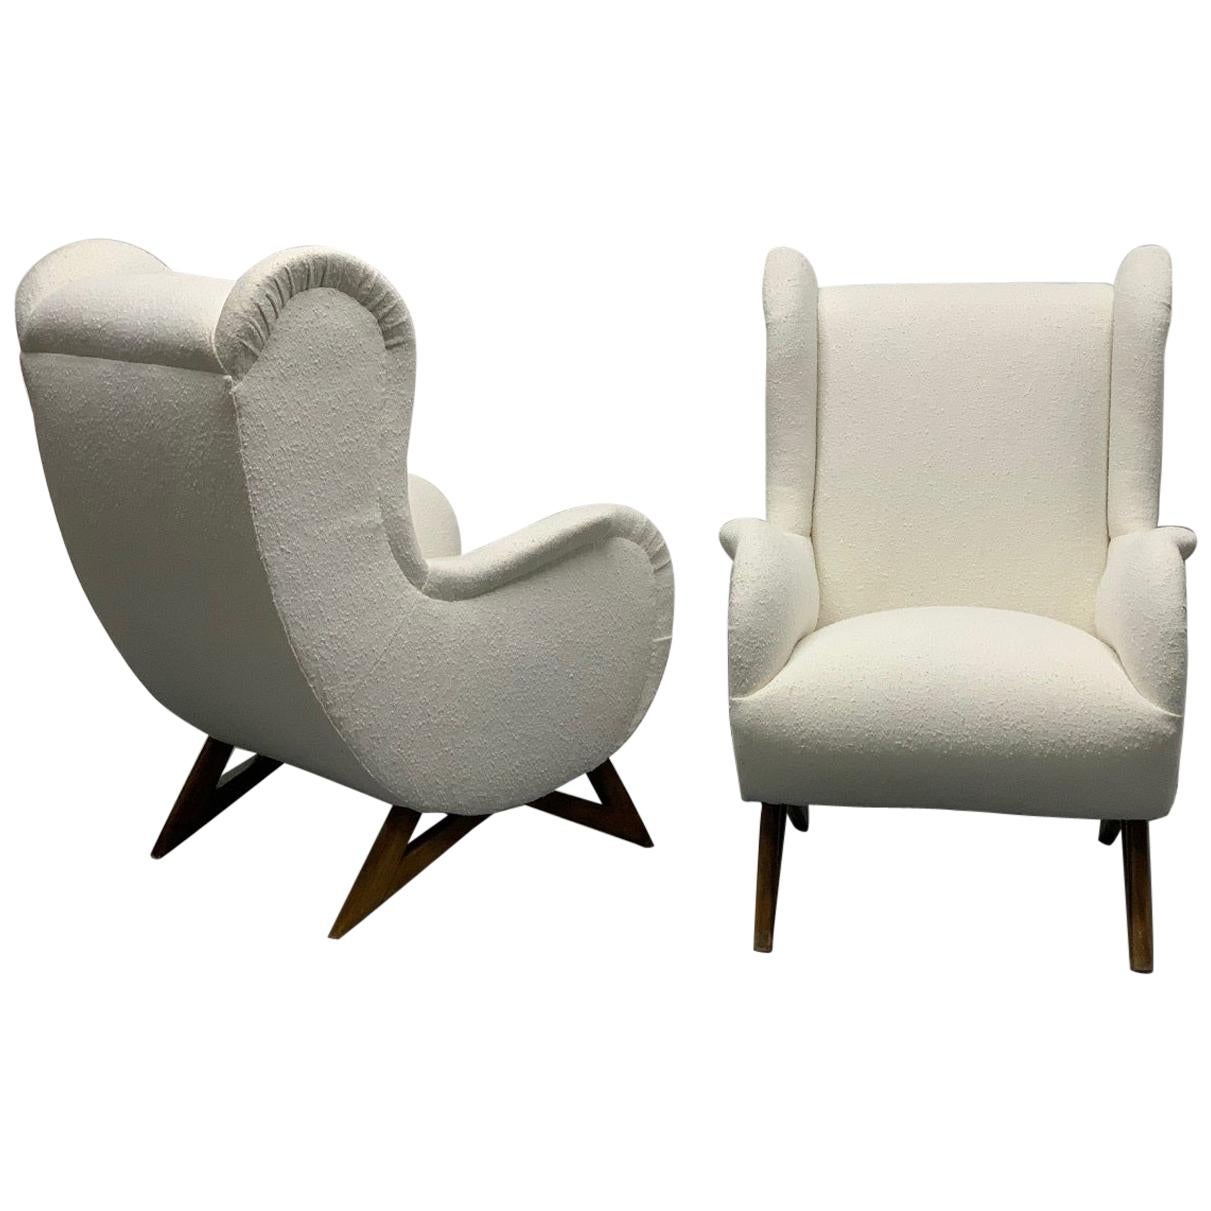 Pair of 1960s Italian Lounge Chairs For Sale